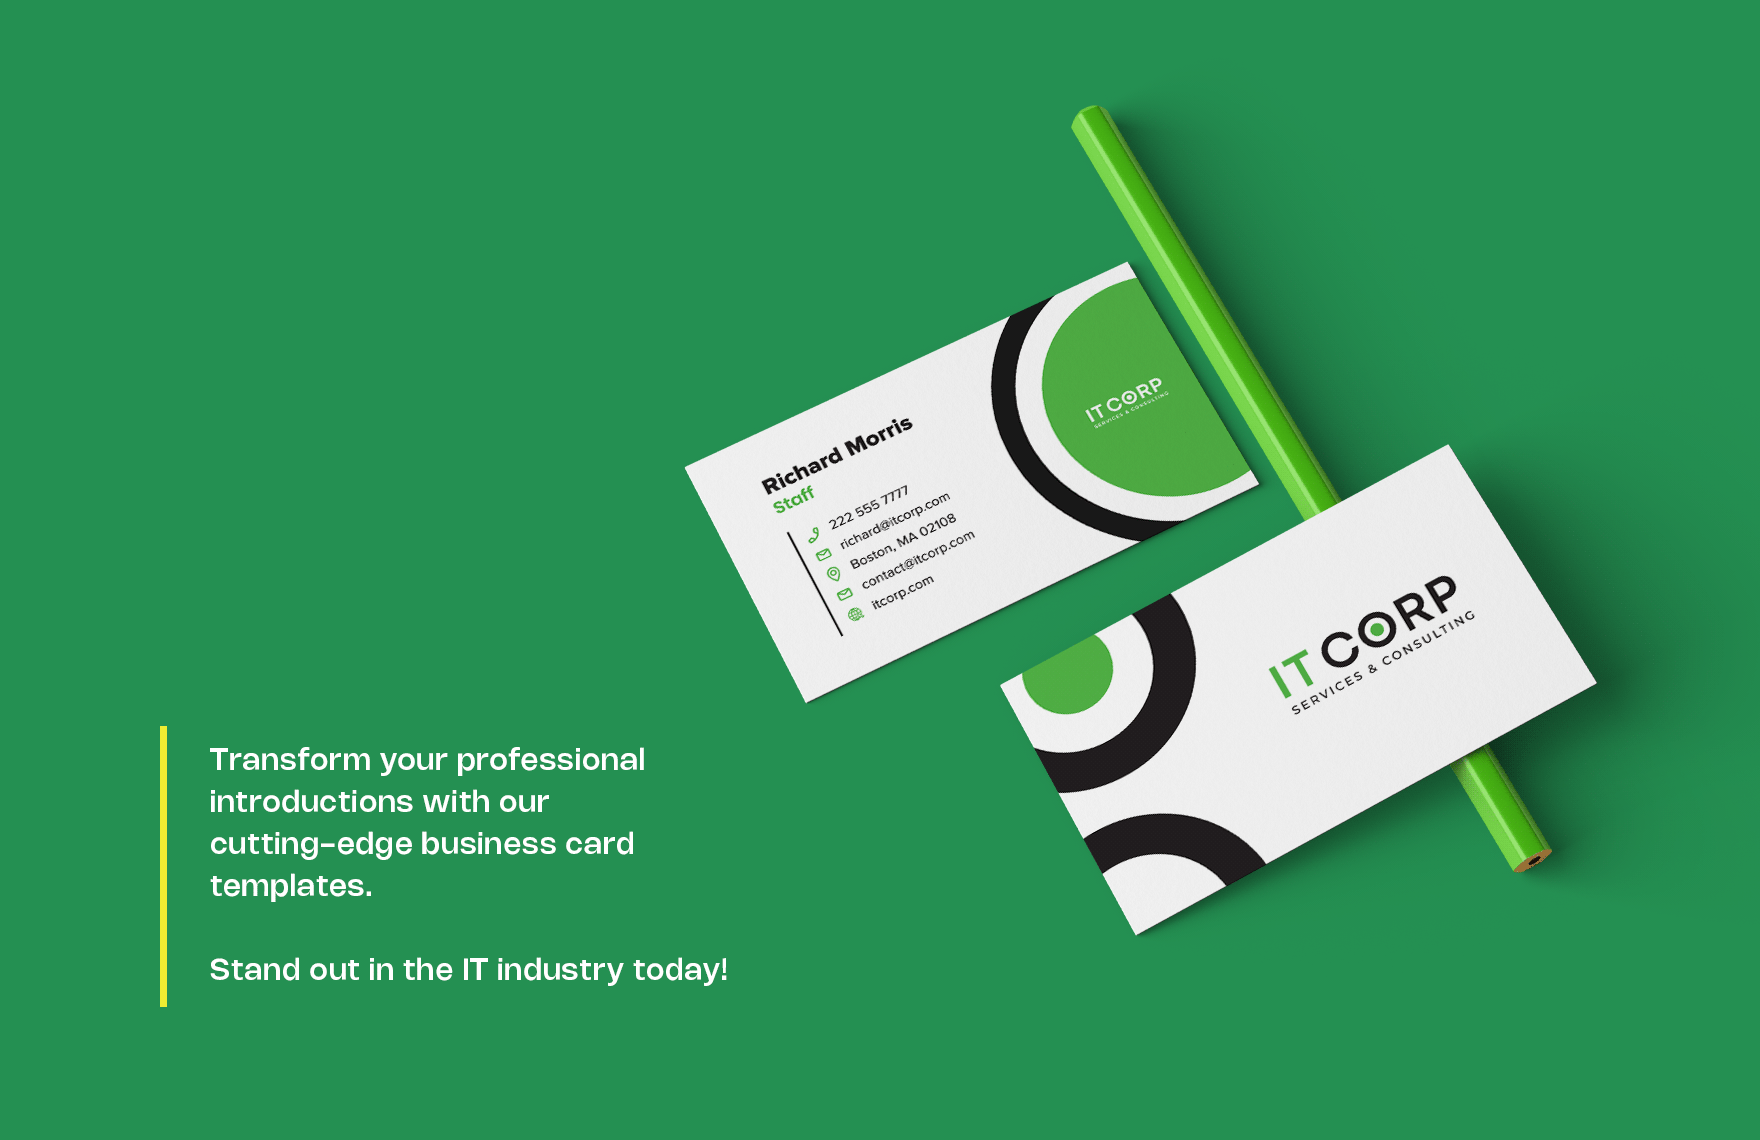 IT Telecommunications Consulting Business Card Template